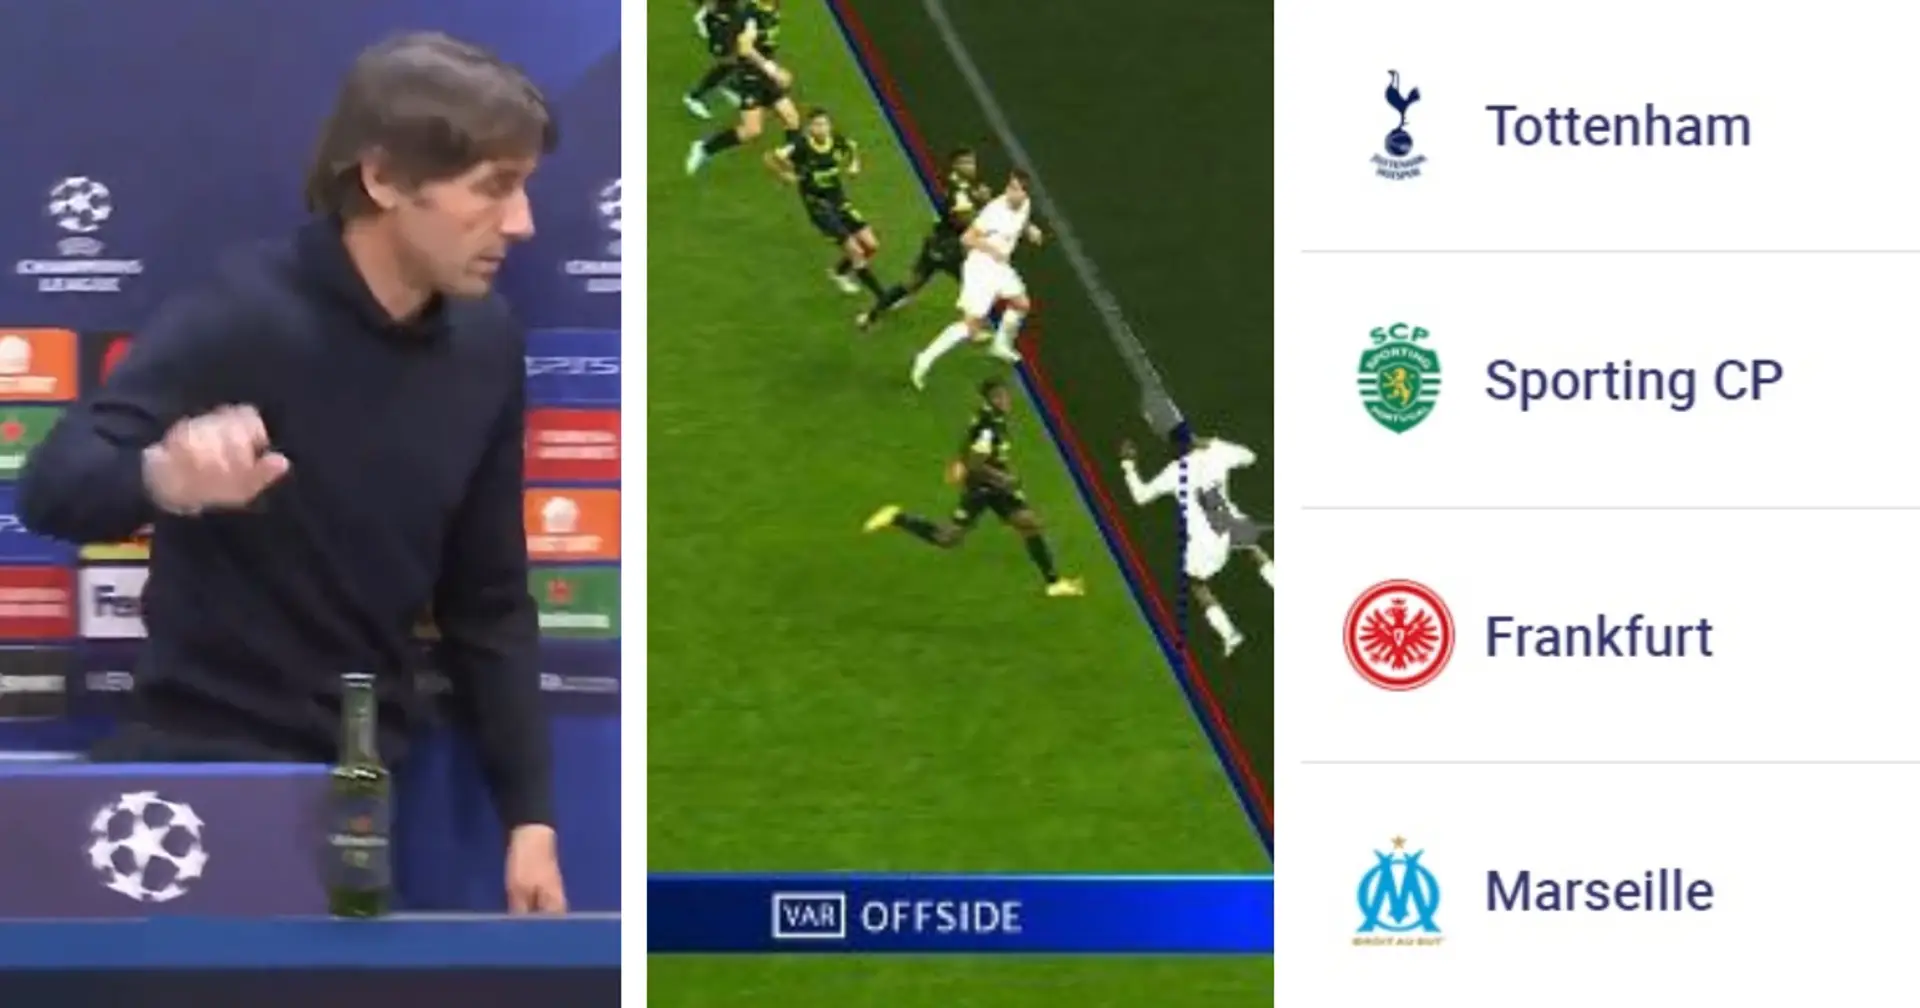 'Let's see if VAR does it against a top team': Antonio Conte all but names Spurs small team after what happened in CL